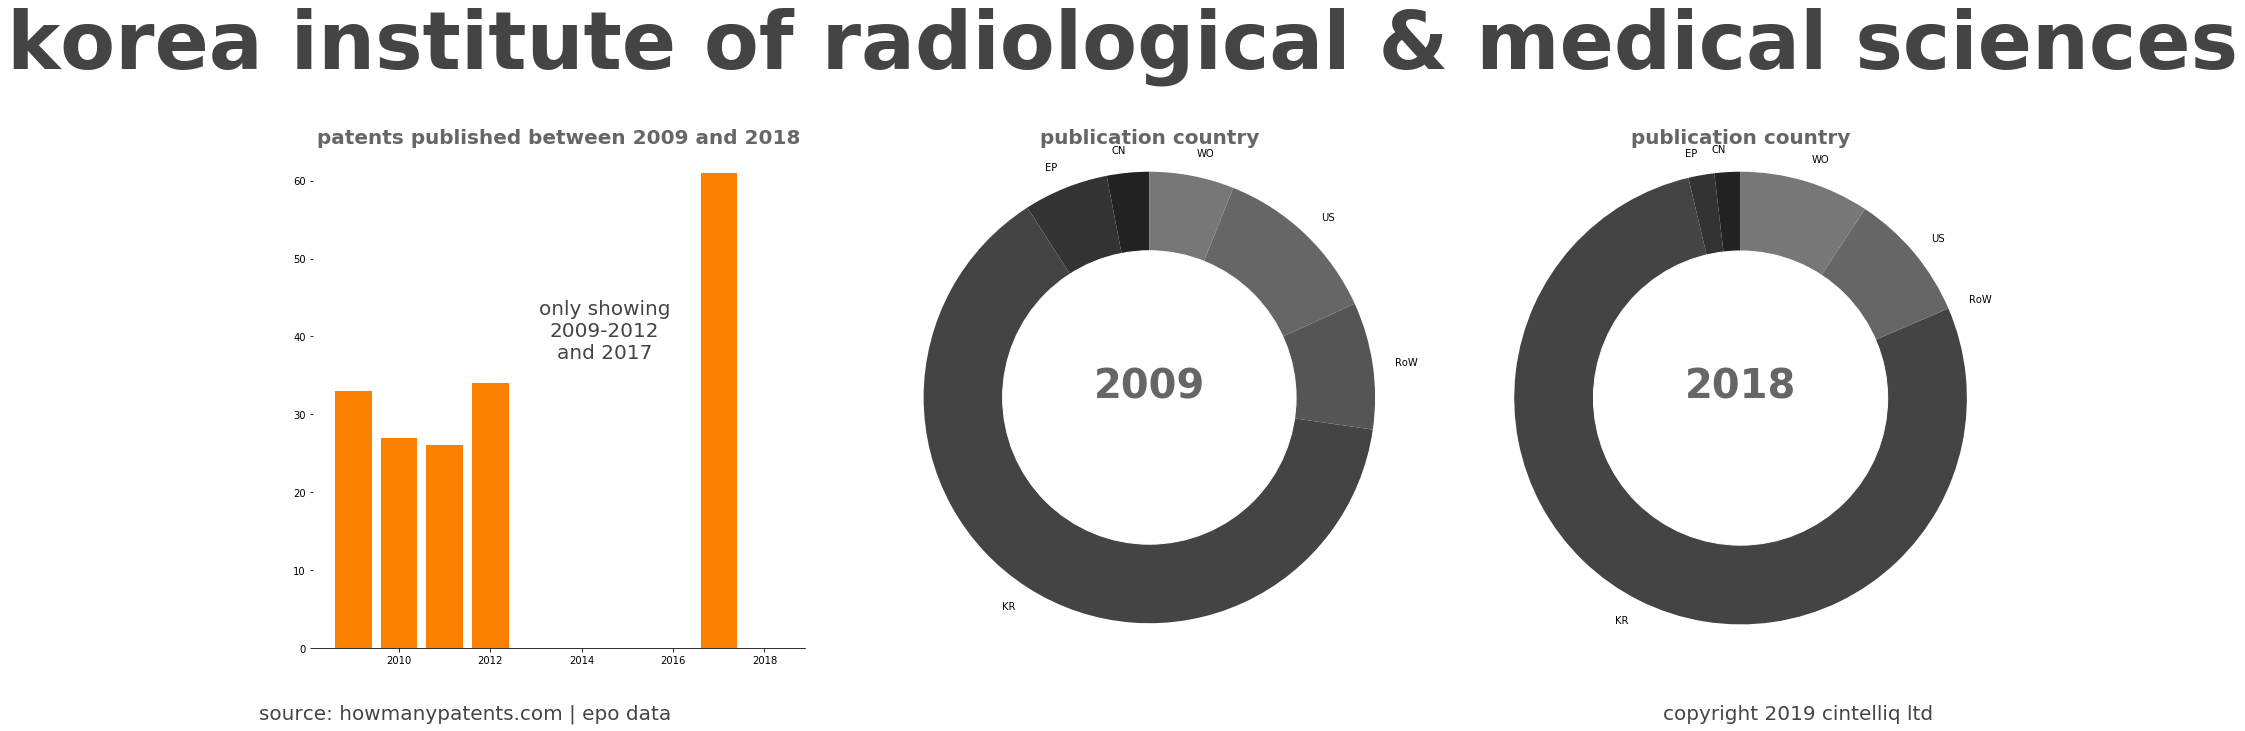 summary of patents for Korea Institute Of Radiological & Medical Sciences